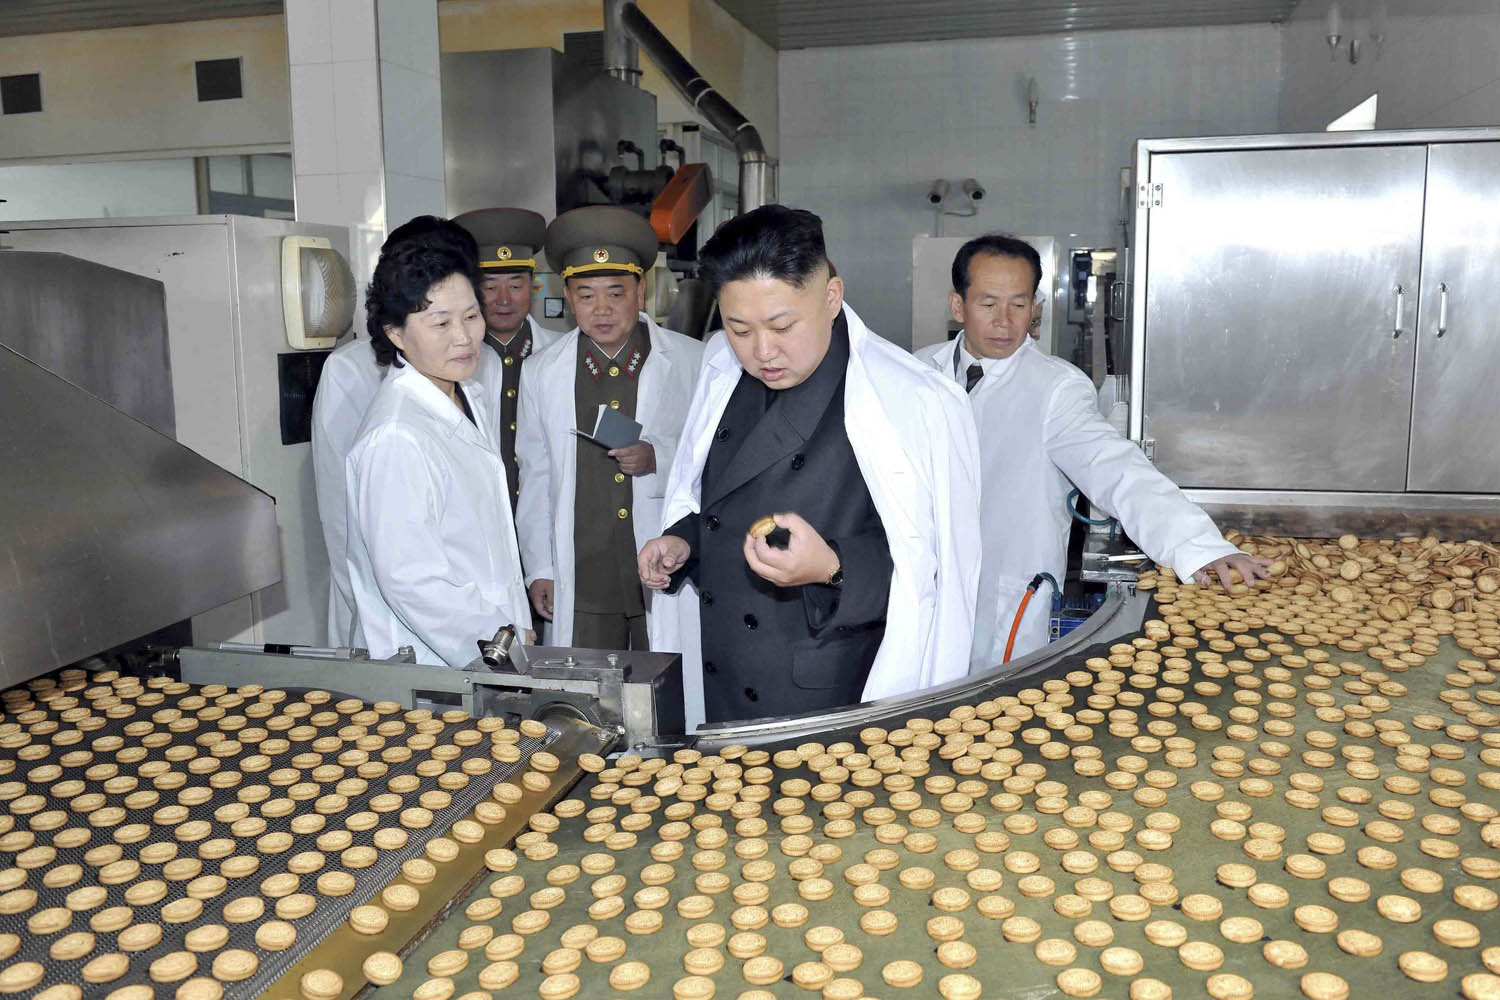 Nov. 17, 2013. North Korean leader Kim Jong Un looks at a biscuit as he provides field guidance at Foodstuff Factory No. 354 of the Korean People's Army in this undated photo released by North Korea's Korean Central News Agency (KCNA) in Pyongyang.